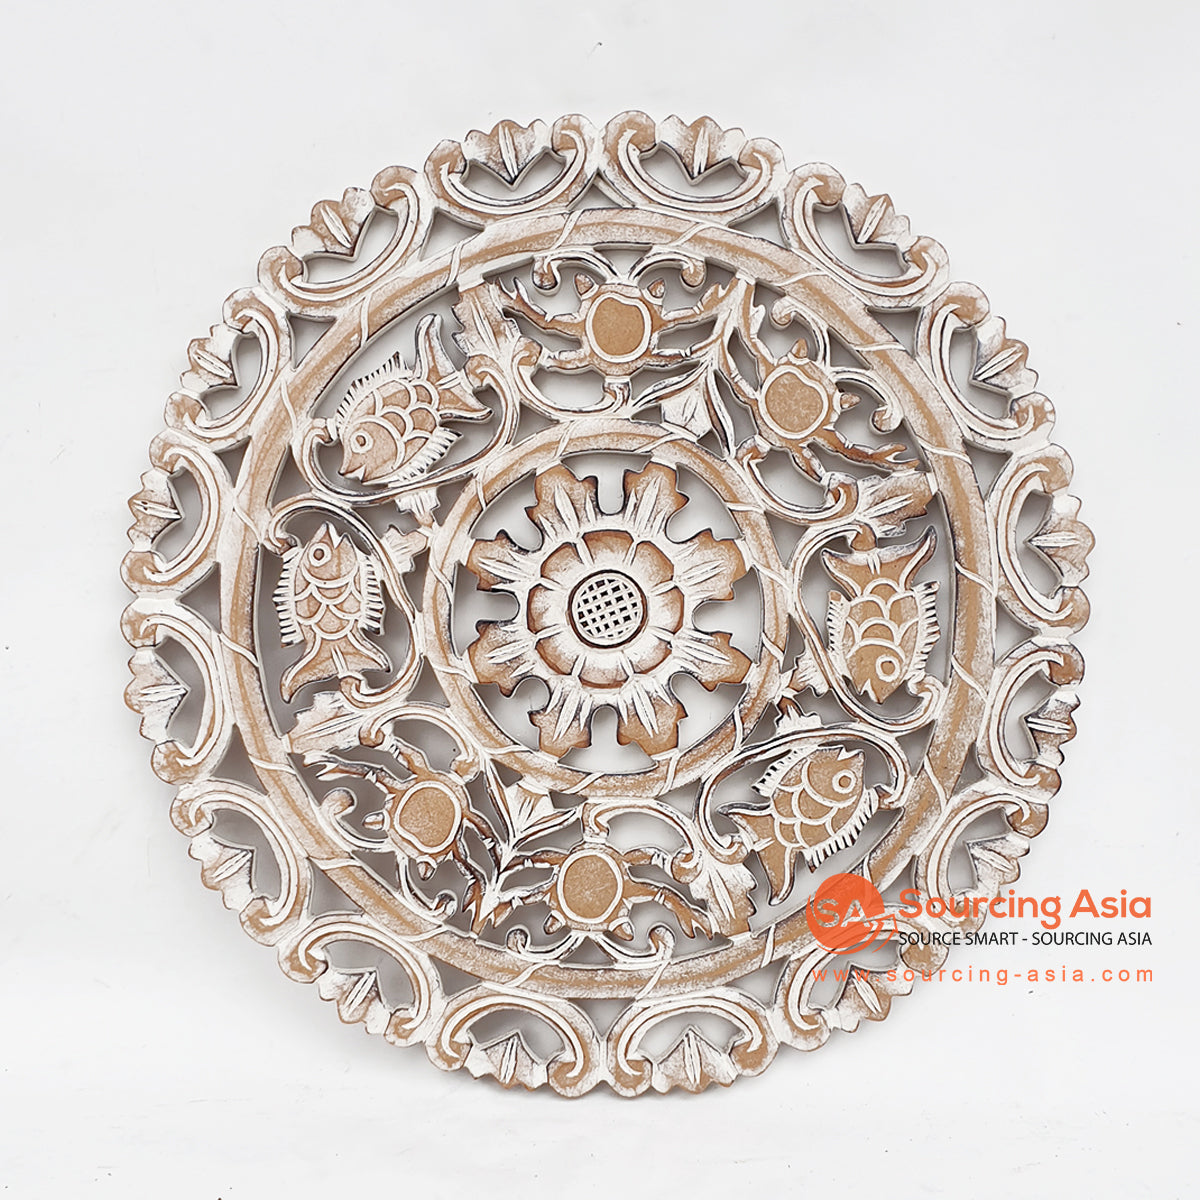 LUHC012 WHITE WASH WOODEN ROUND CARVED PANEL